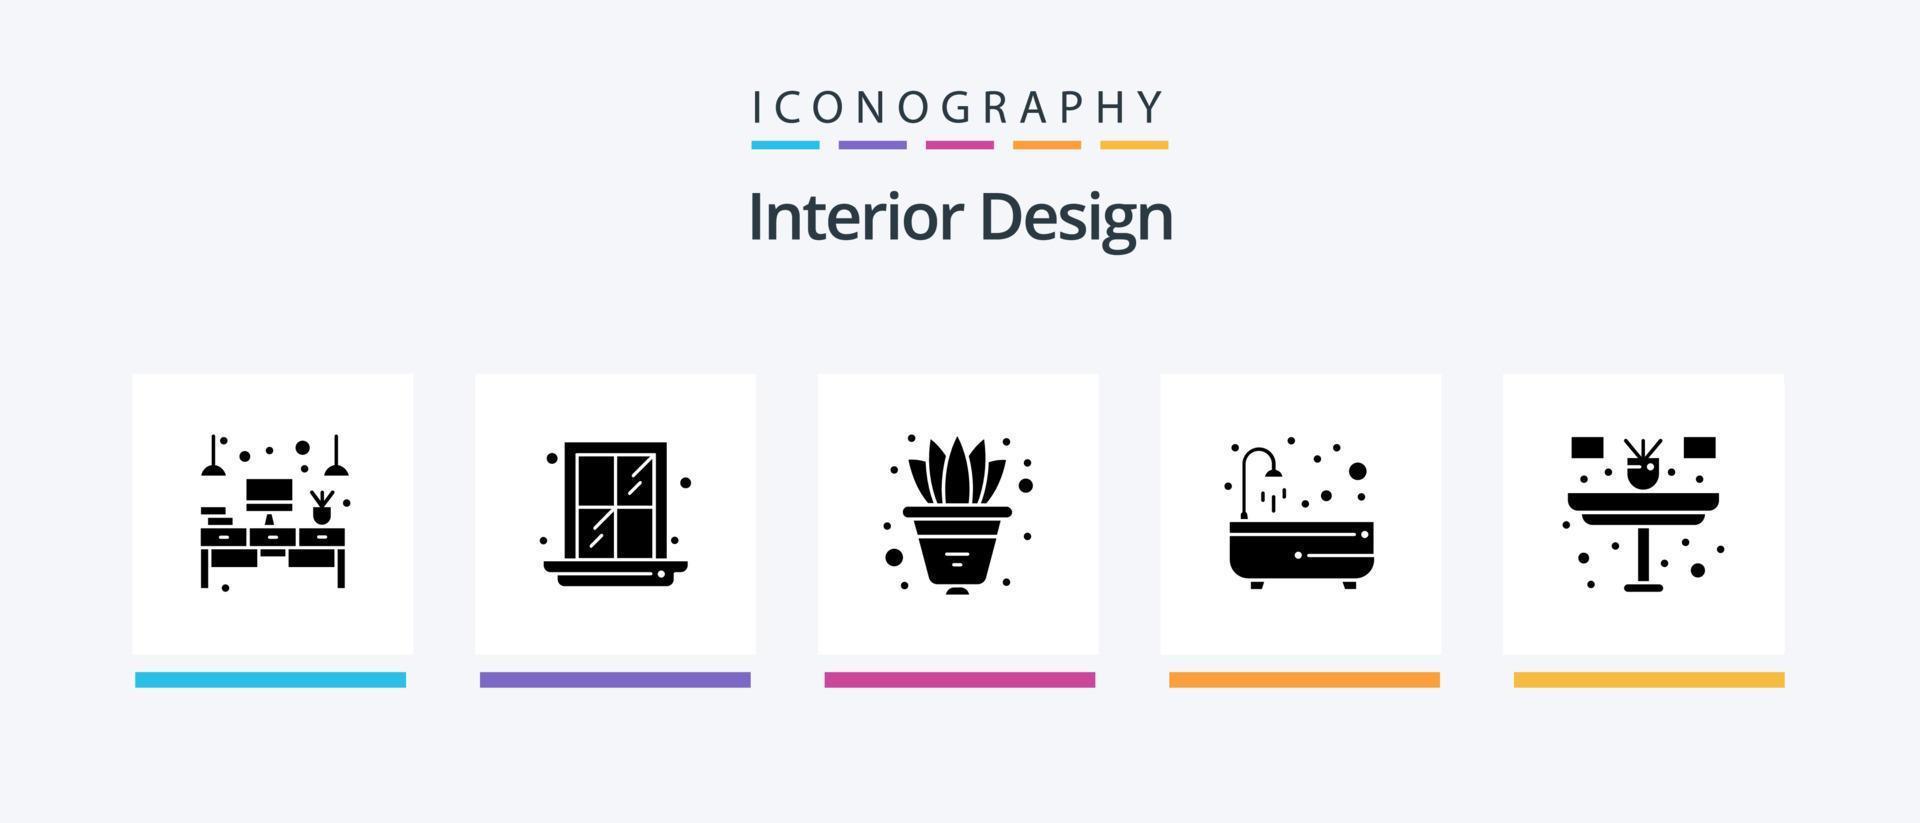 Interior Design Glyph 5 Icon Pack Including flower. shower. flower. relax. bath. Creative Icons Design vector